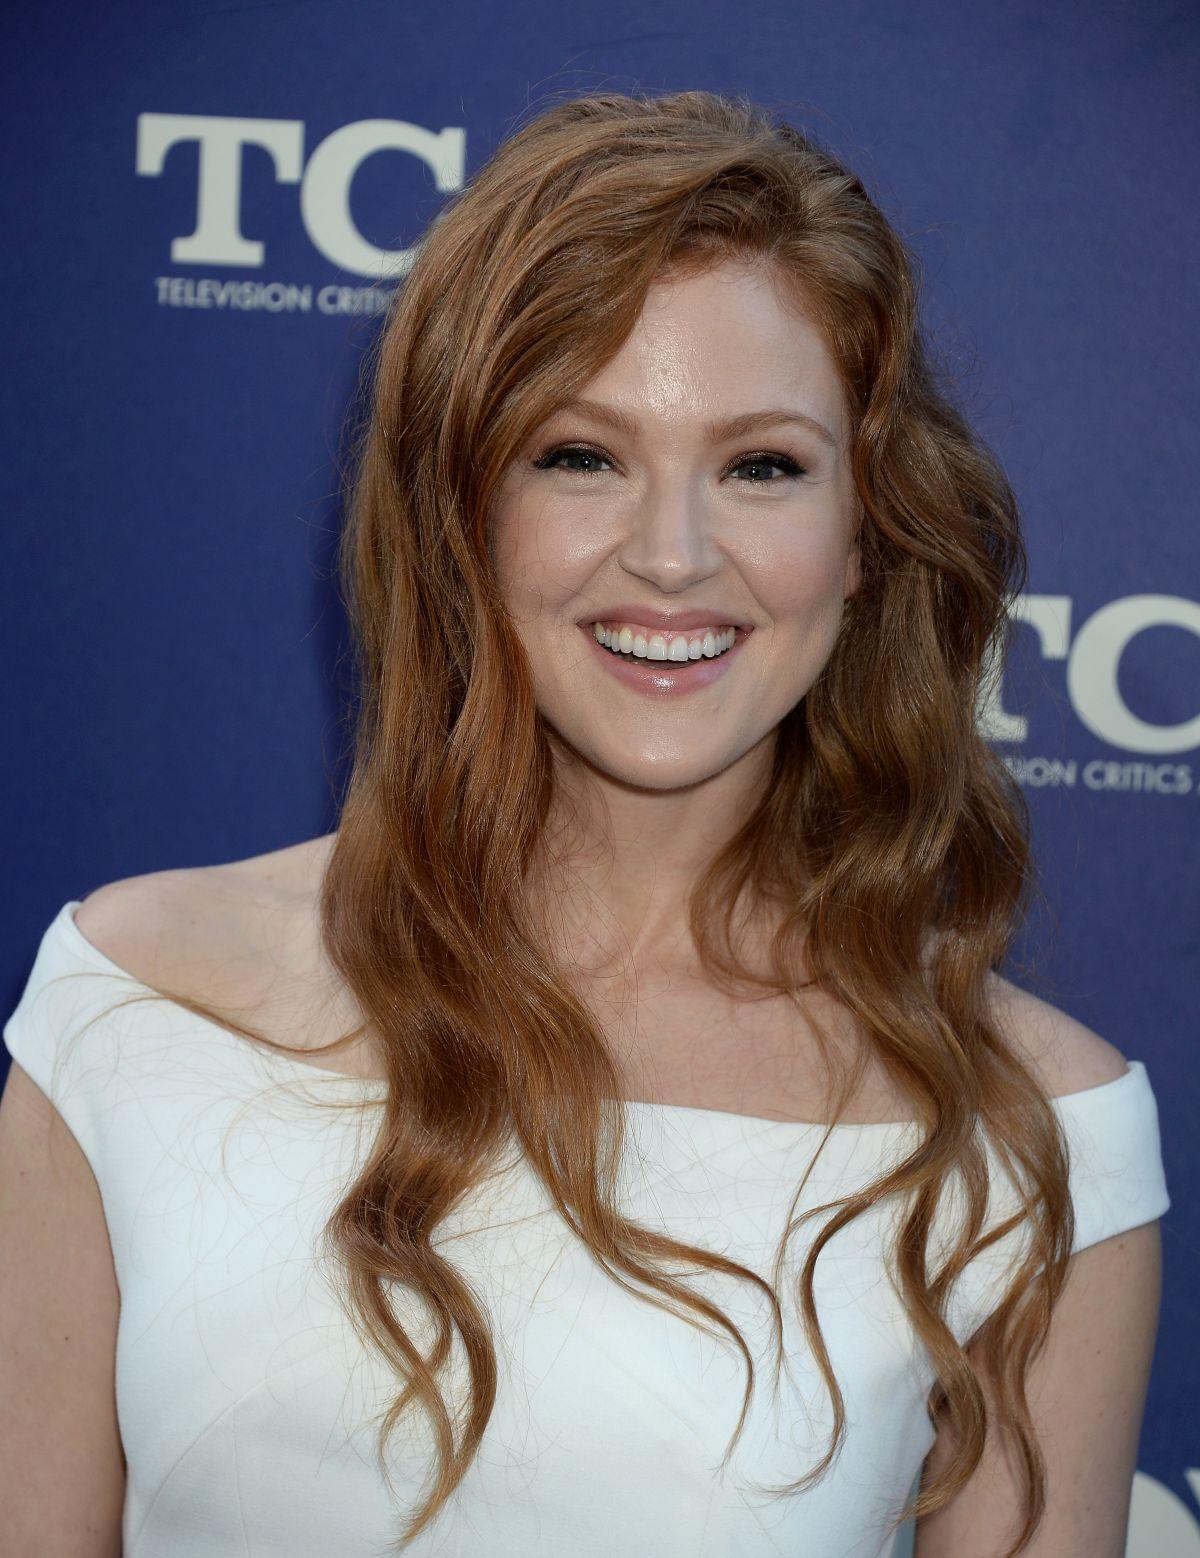 65+ Hot Pictures Of Maggie Geha – Poison Ivy Gotham TV Series | Best Of Comic Books